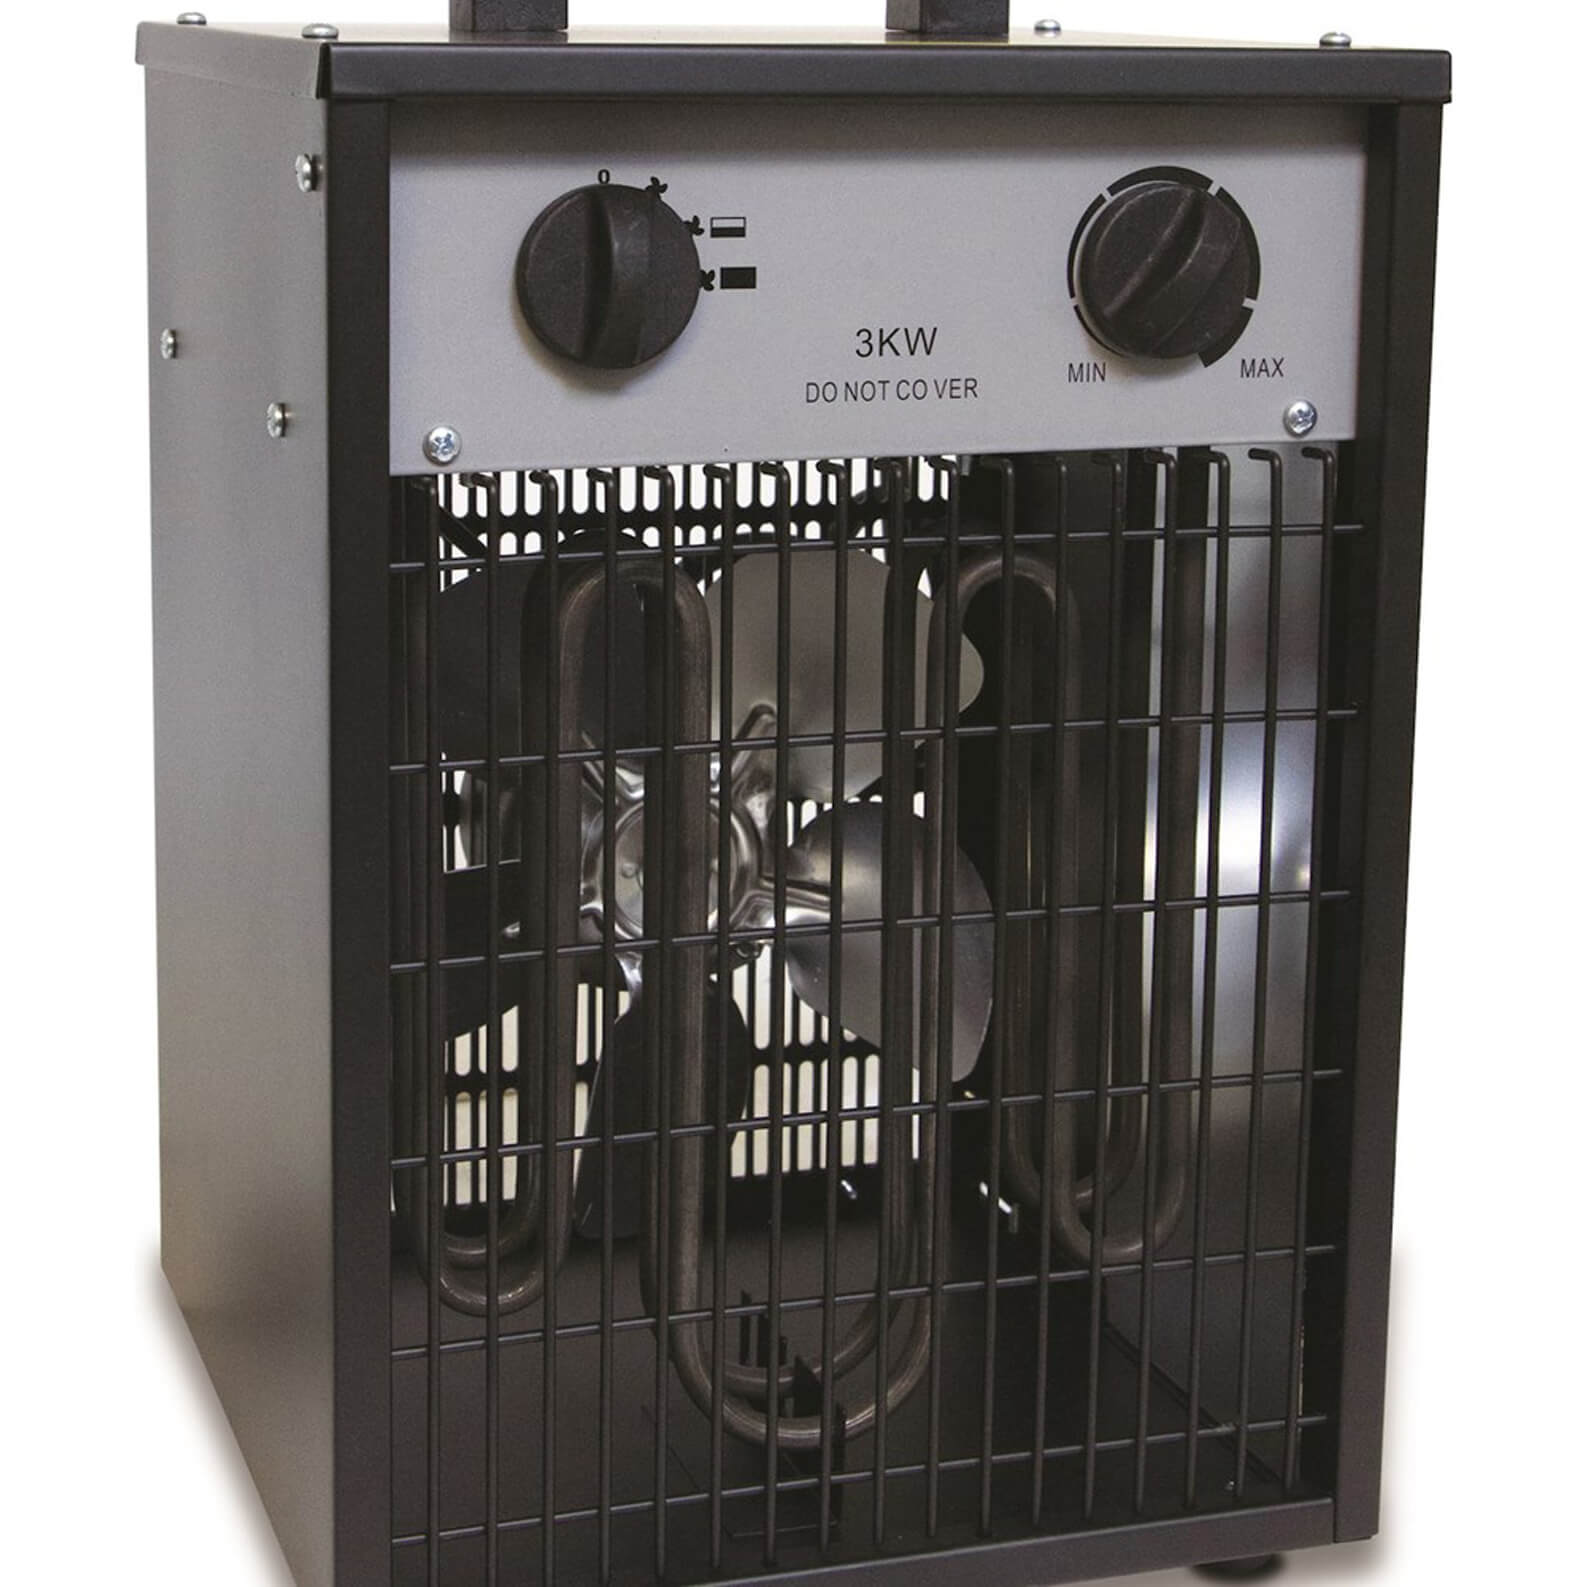 Town and Country 3KW Electric Greenhouse Heater